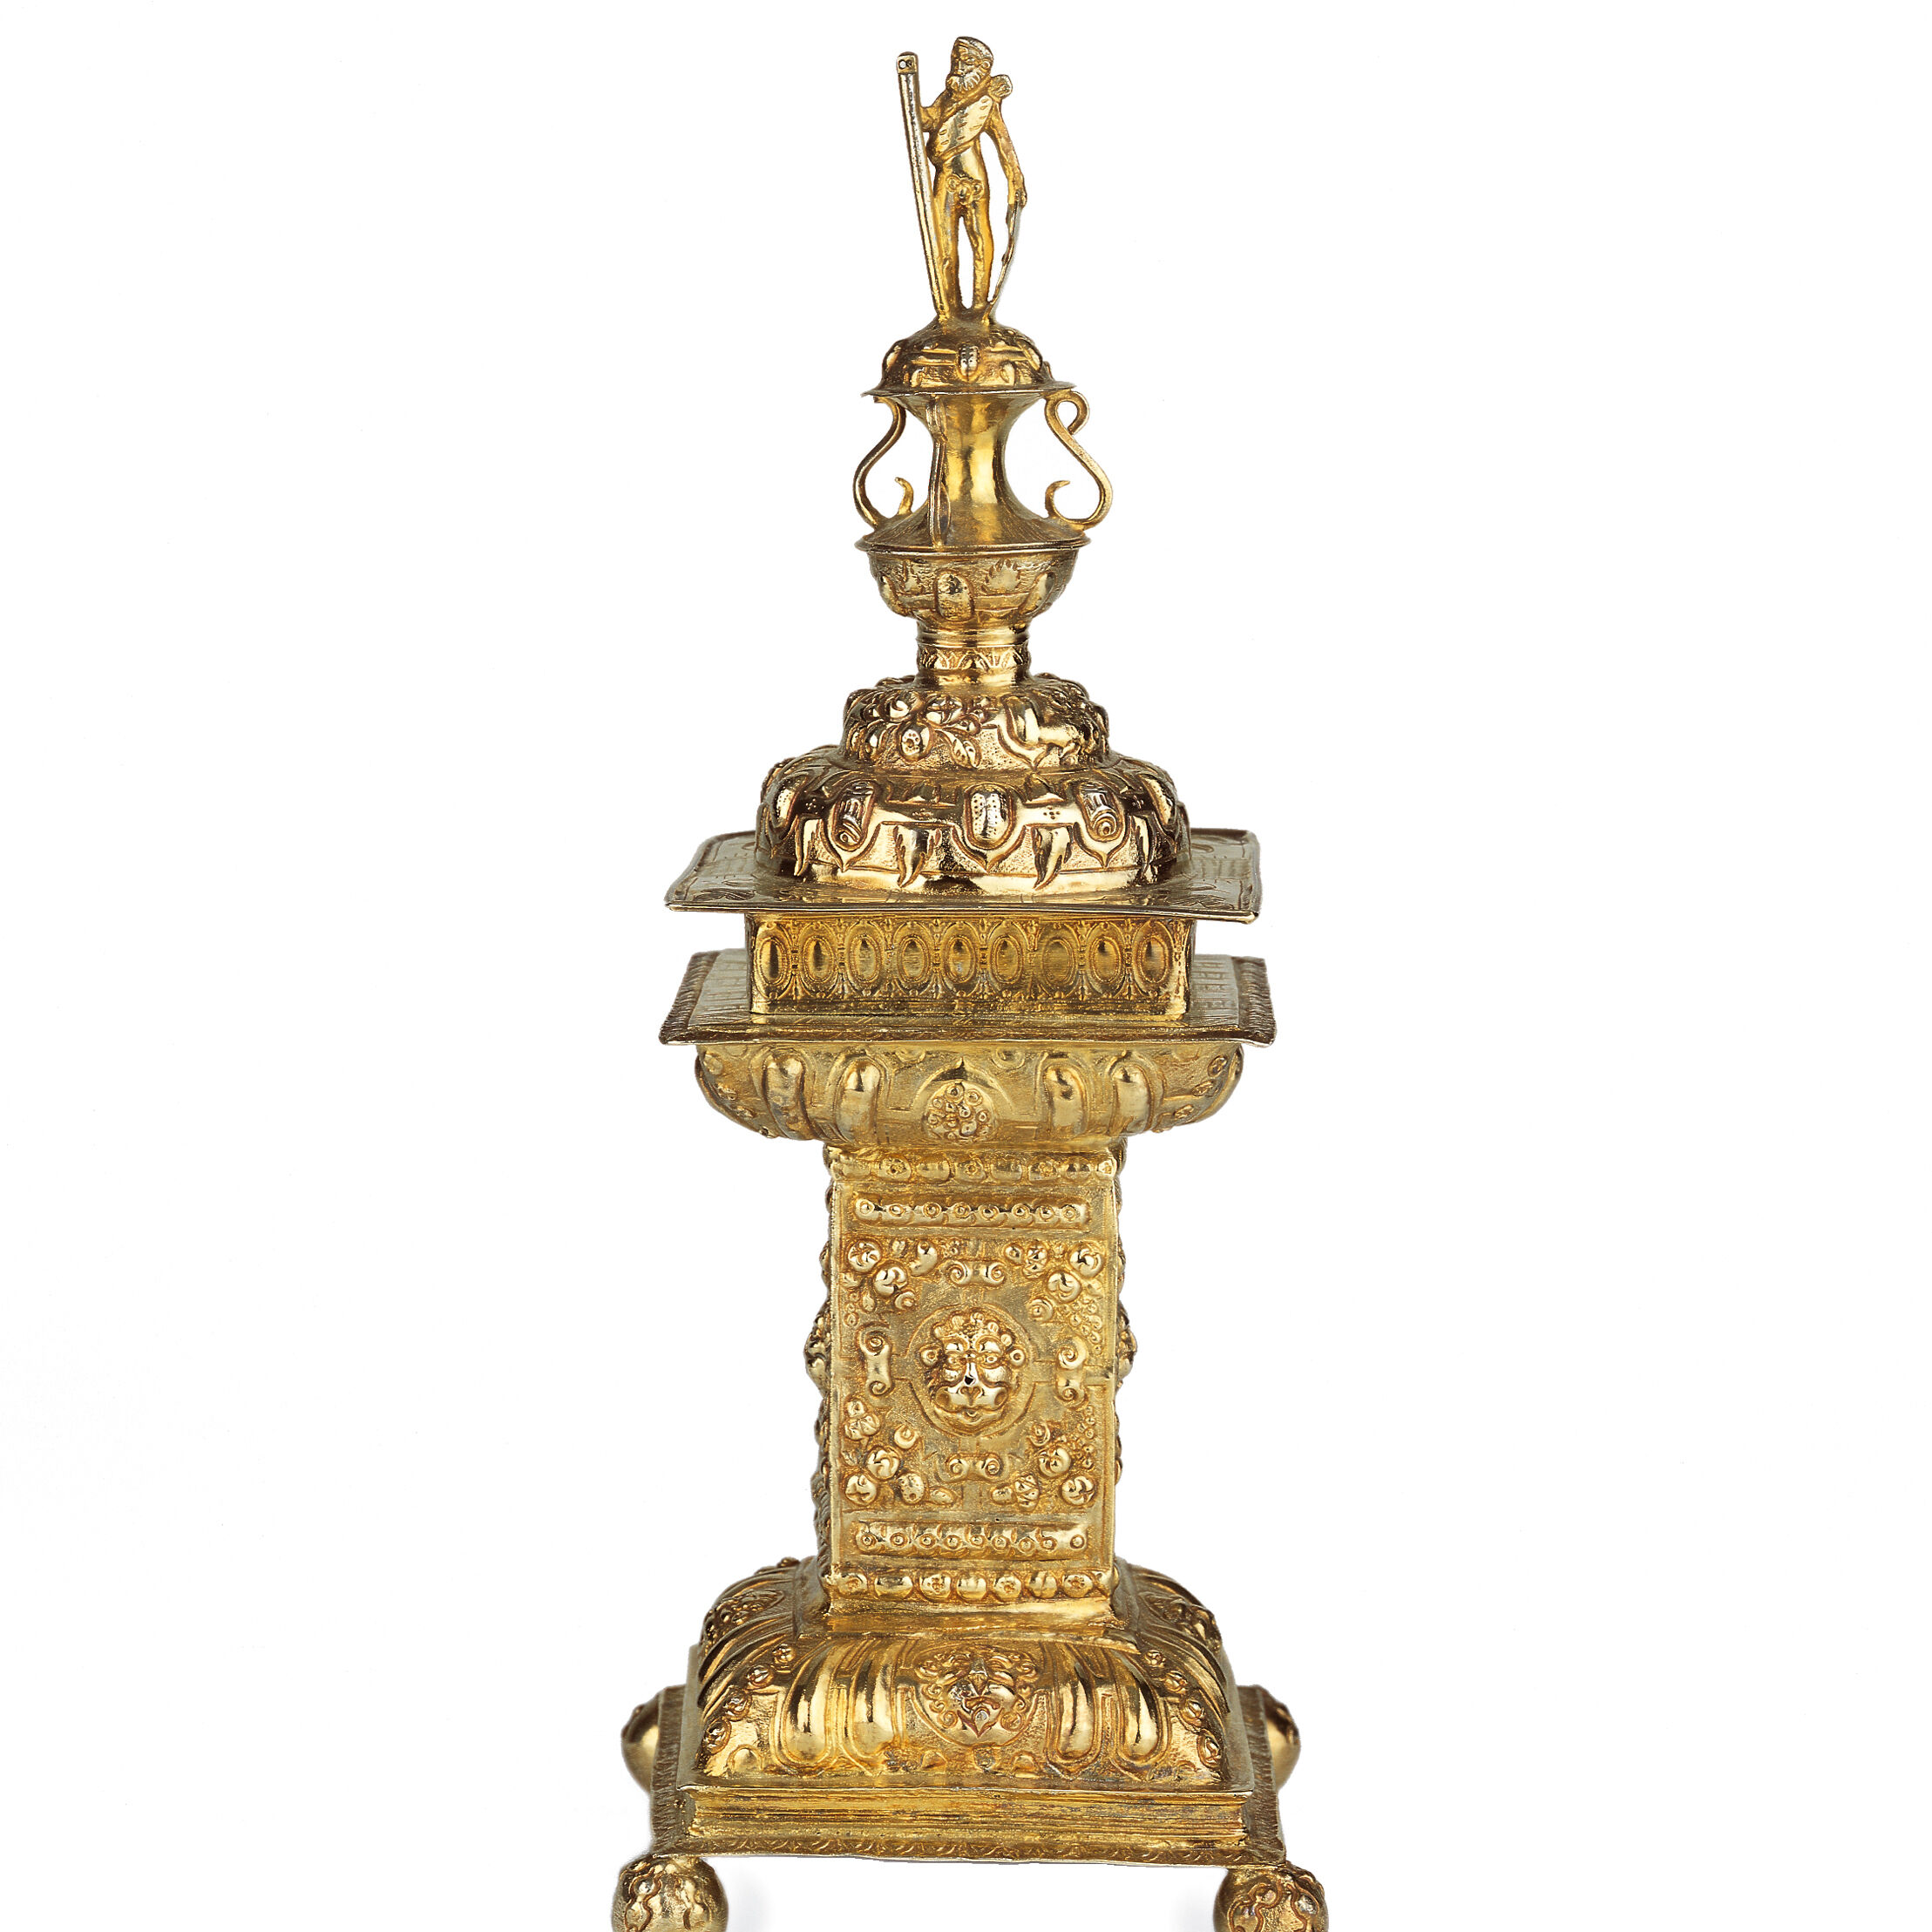 Britain, London (possibly a bull's head maker's mark), Standing salt, 1583 84, London, silver gilt,
27.5 x 10.2 x 10.4 cm; Gift of Gladys Penfold Hyland in memory of her husband Frank 1964, Art Gallery of South Australia, Adelaide
